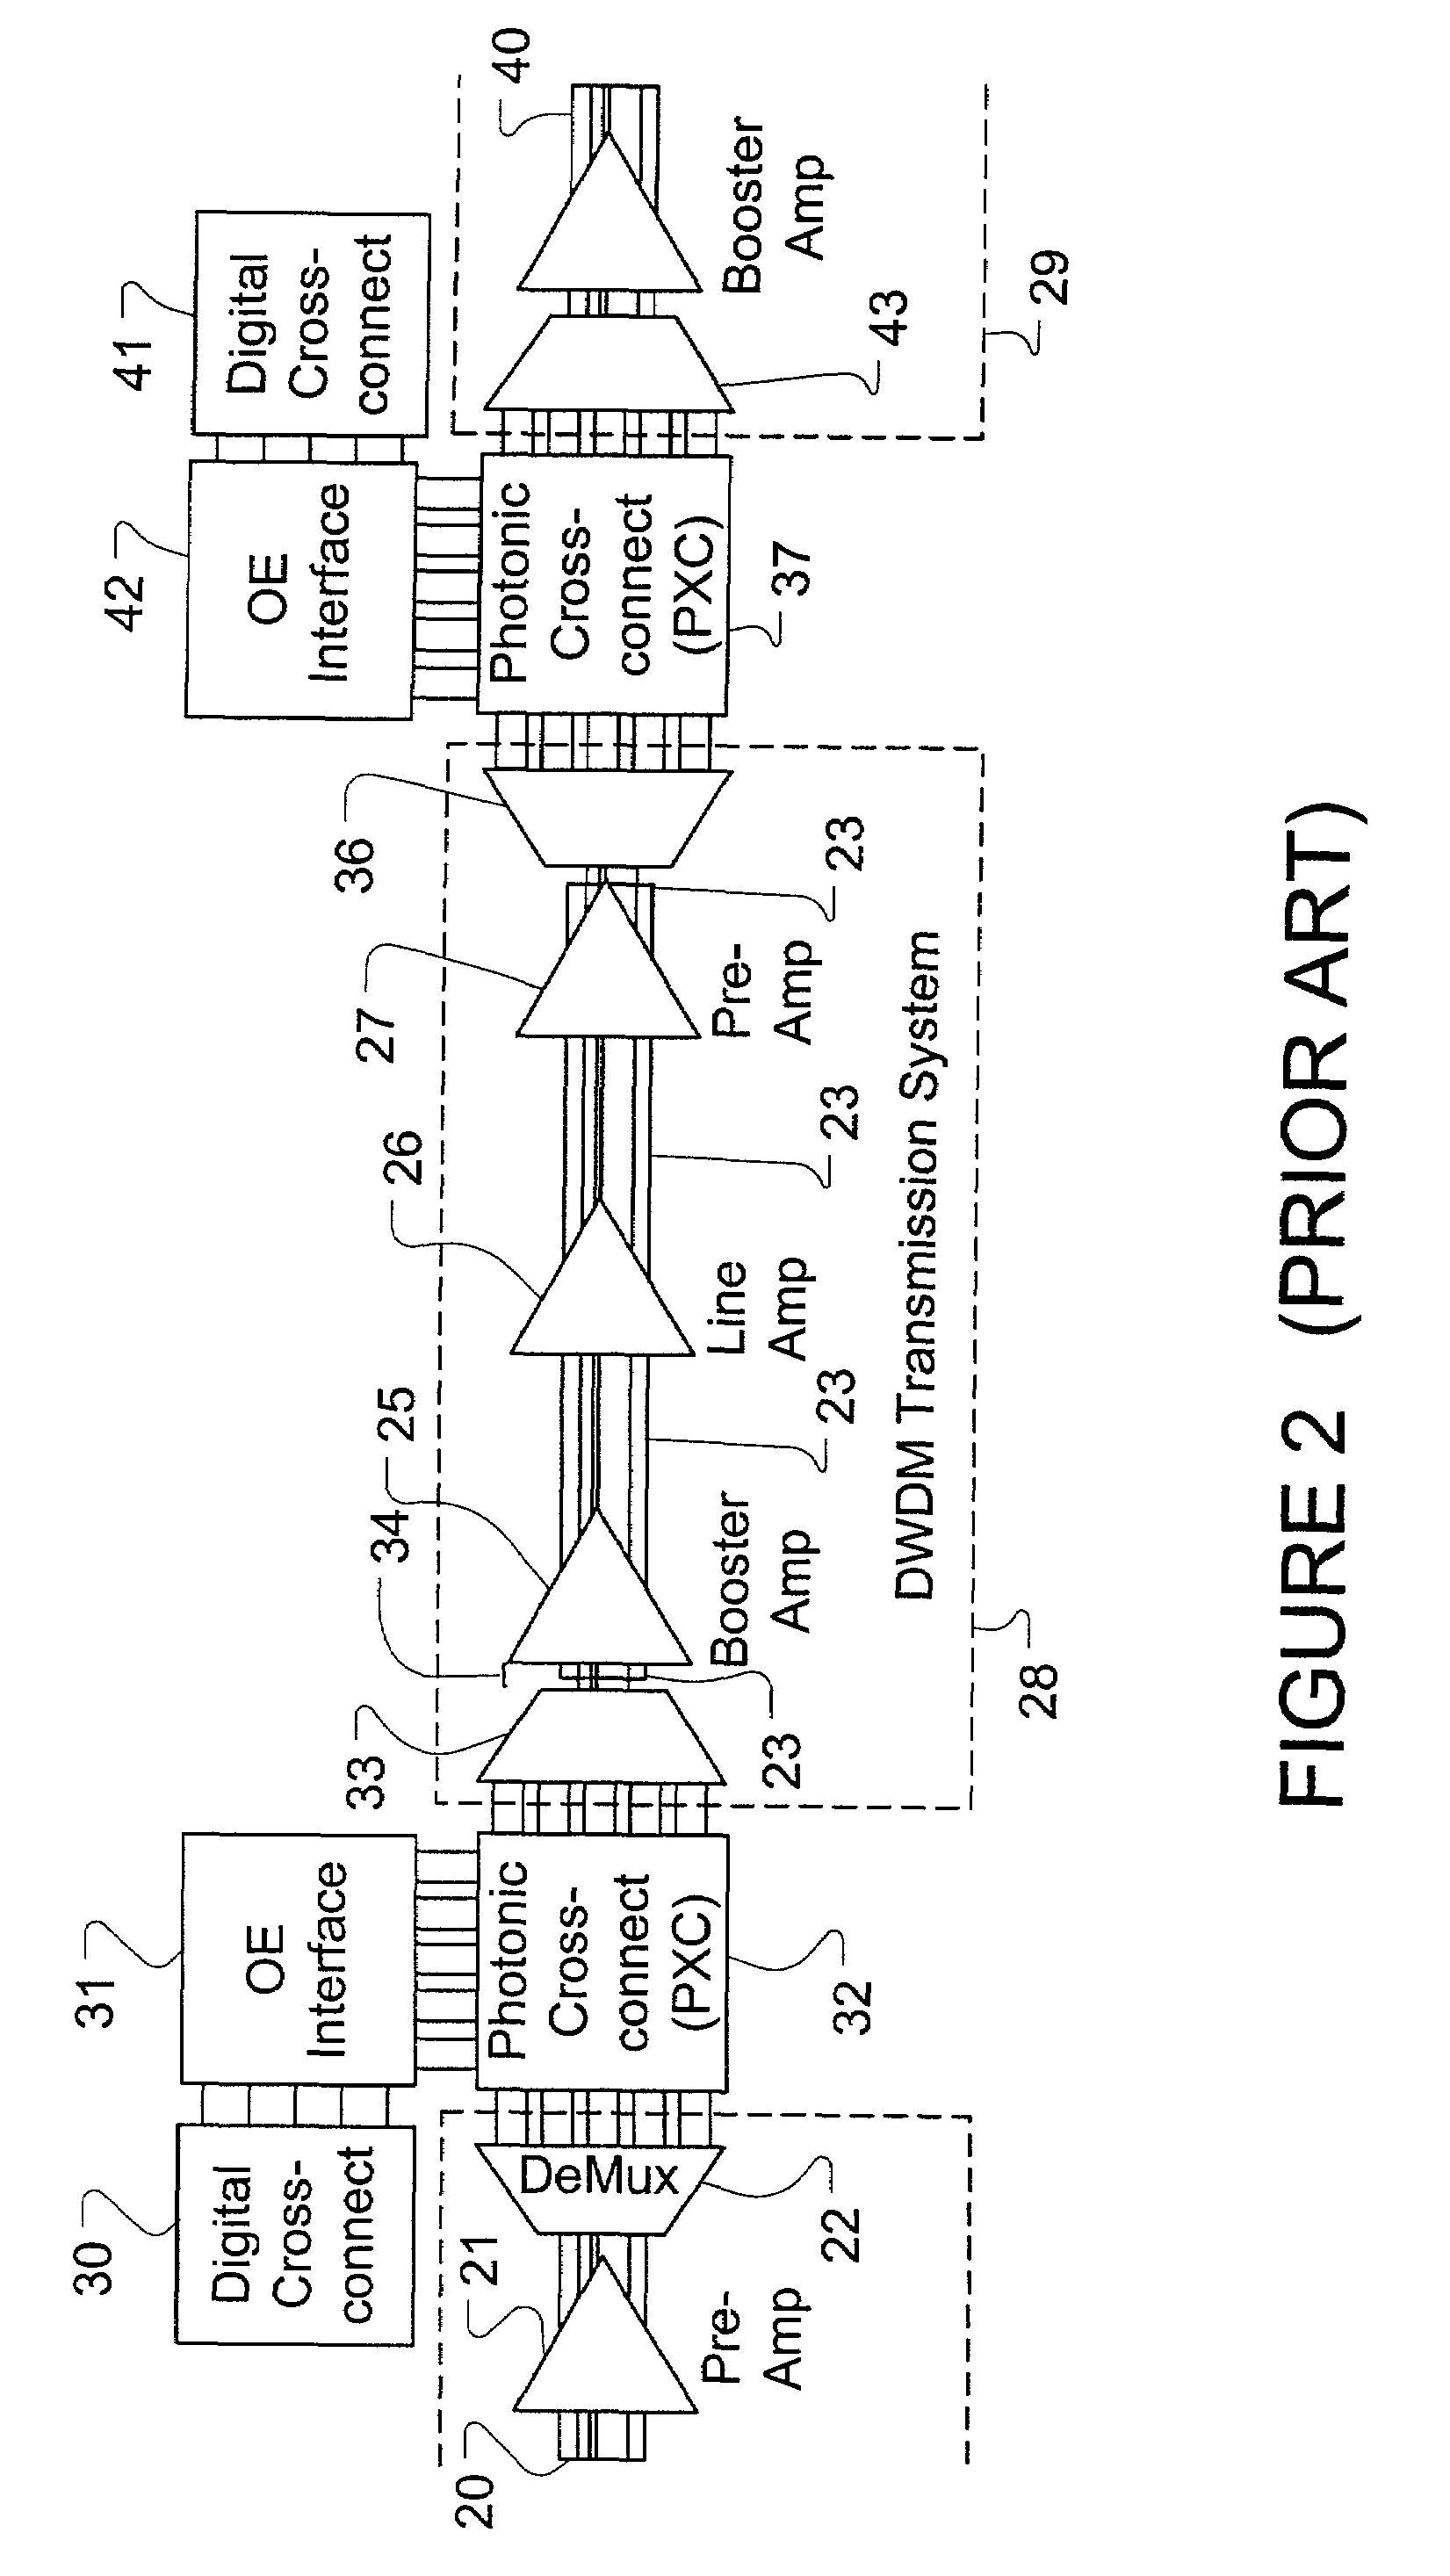 Optical amplification in photonic switched crossconnect systems